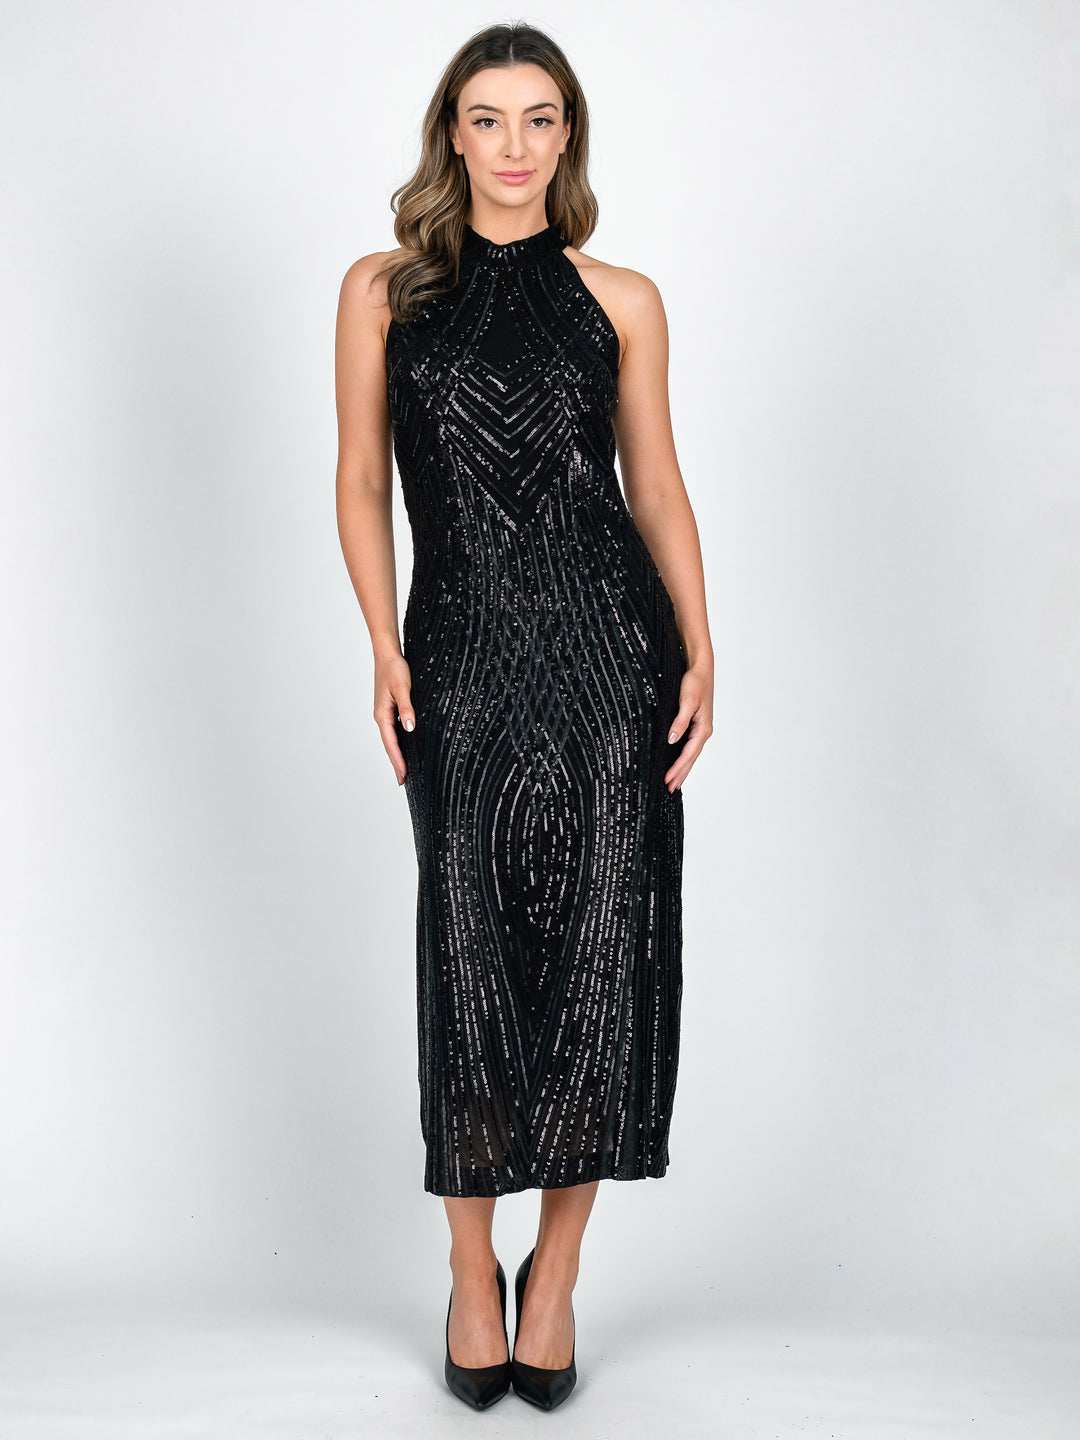 GALA Polo Neck Evening Gown